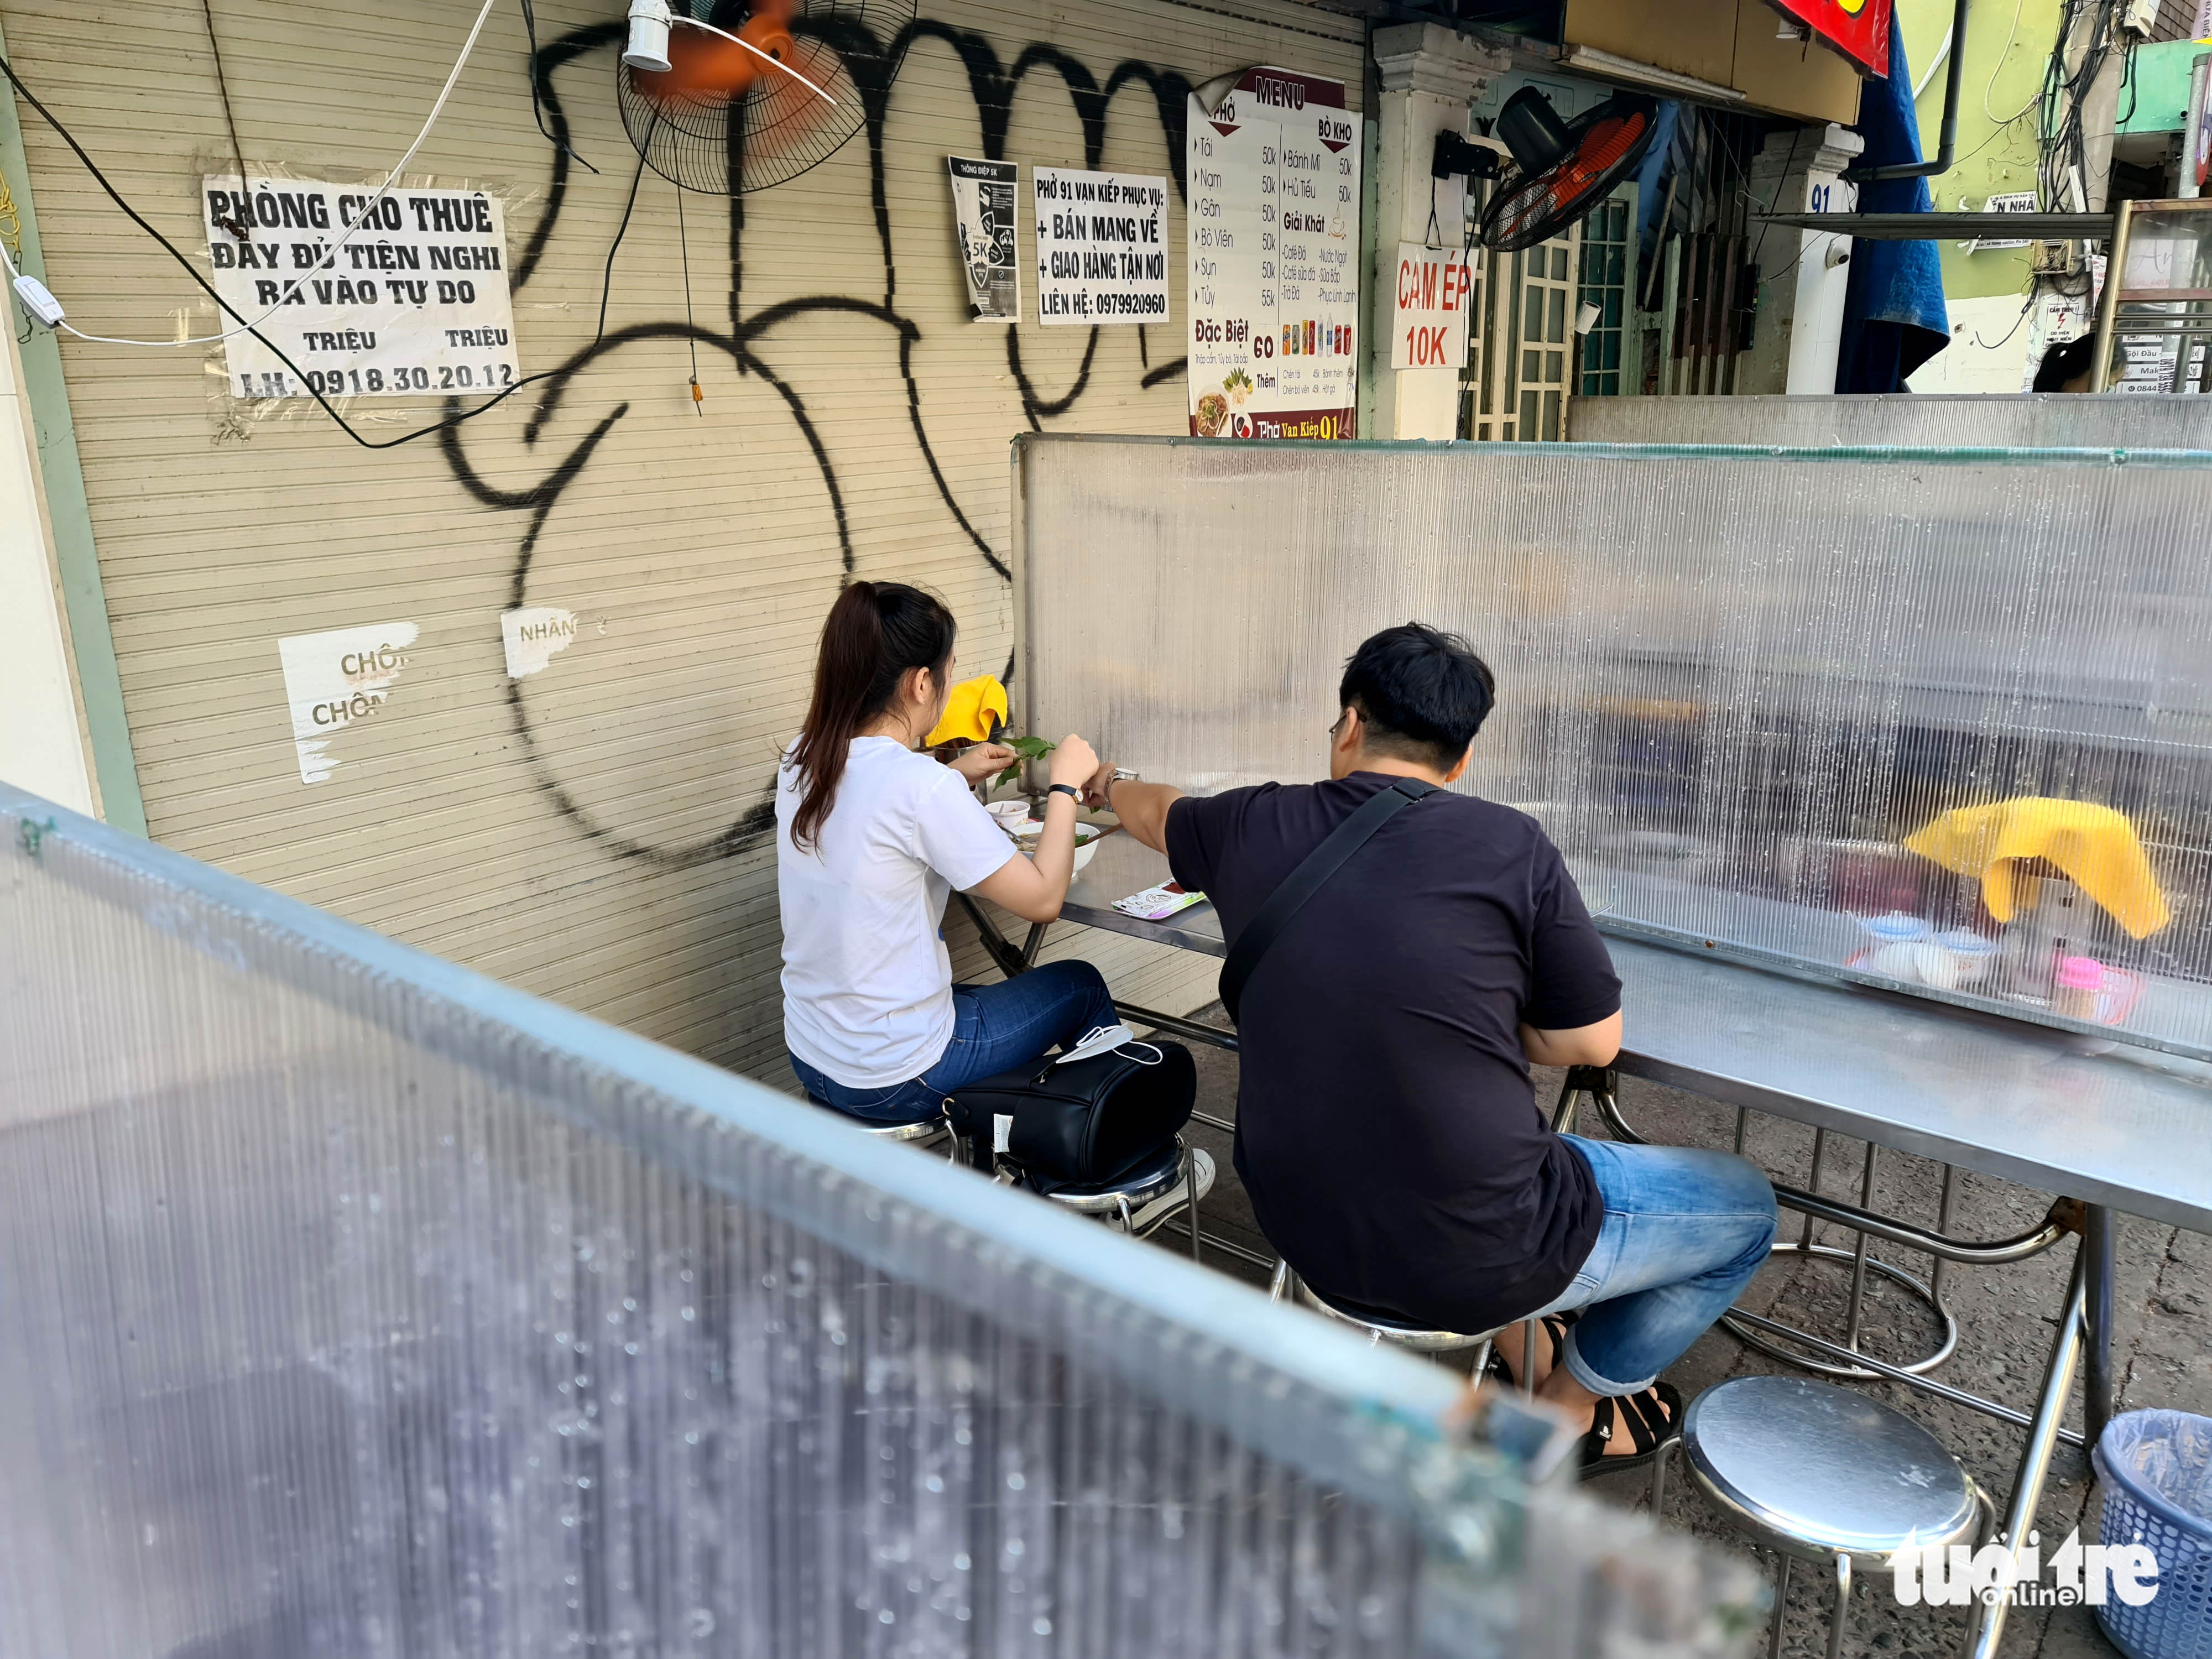 A pho shop installs partitions on tables as part of pandemic prevention and control measures. Photo: Ngoc Hien / Tuoi Tre